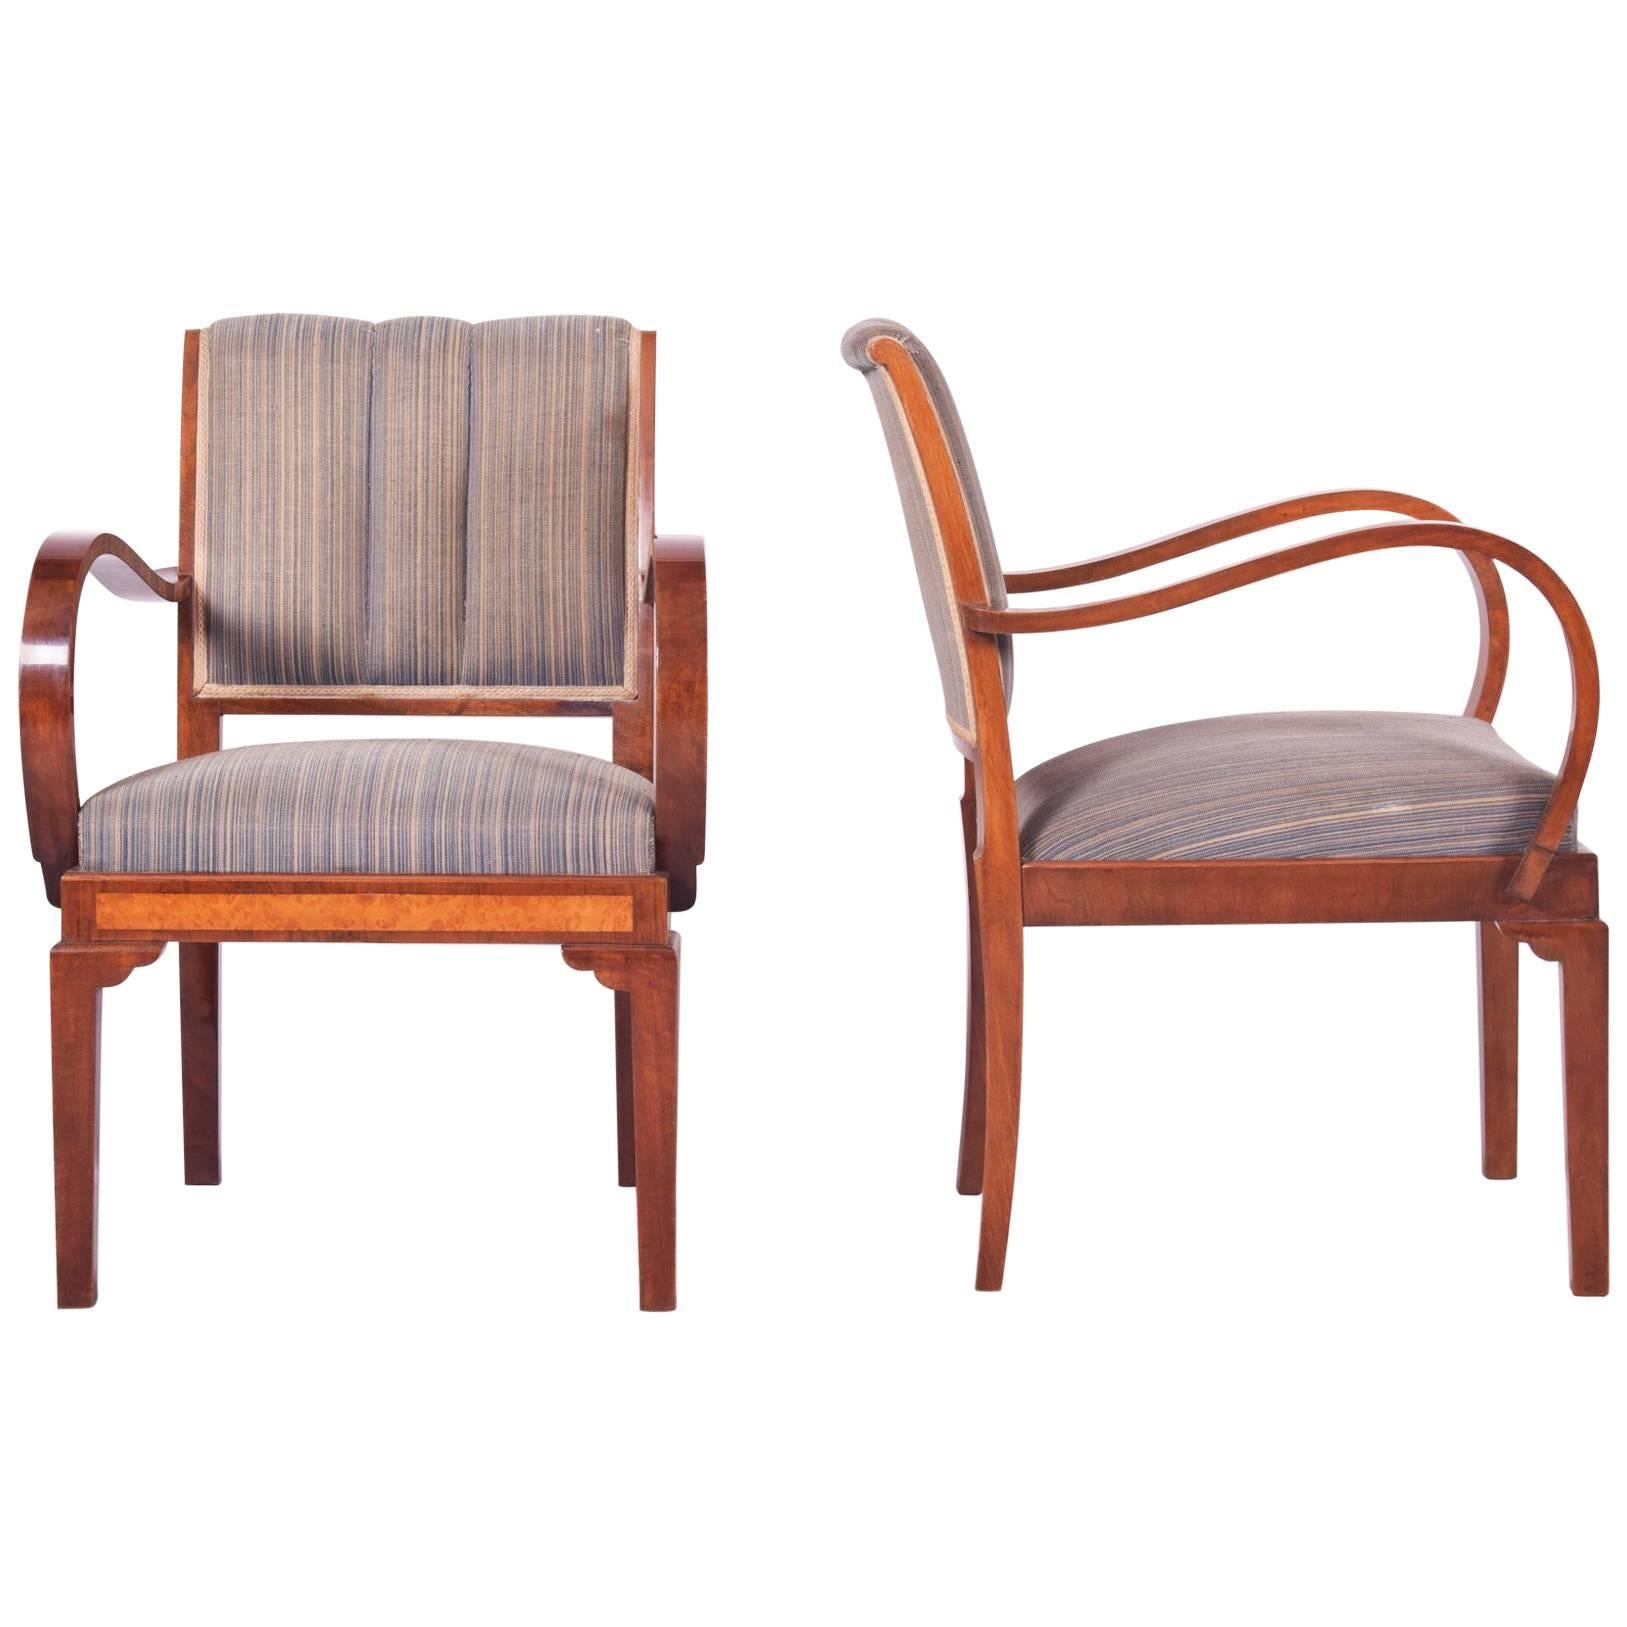 Restored Pair of Art Deco Armchairs, Original Preserved Fabric, Shellac Polish For Sale